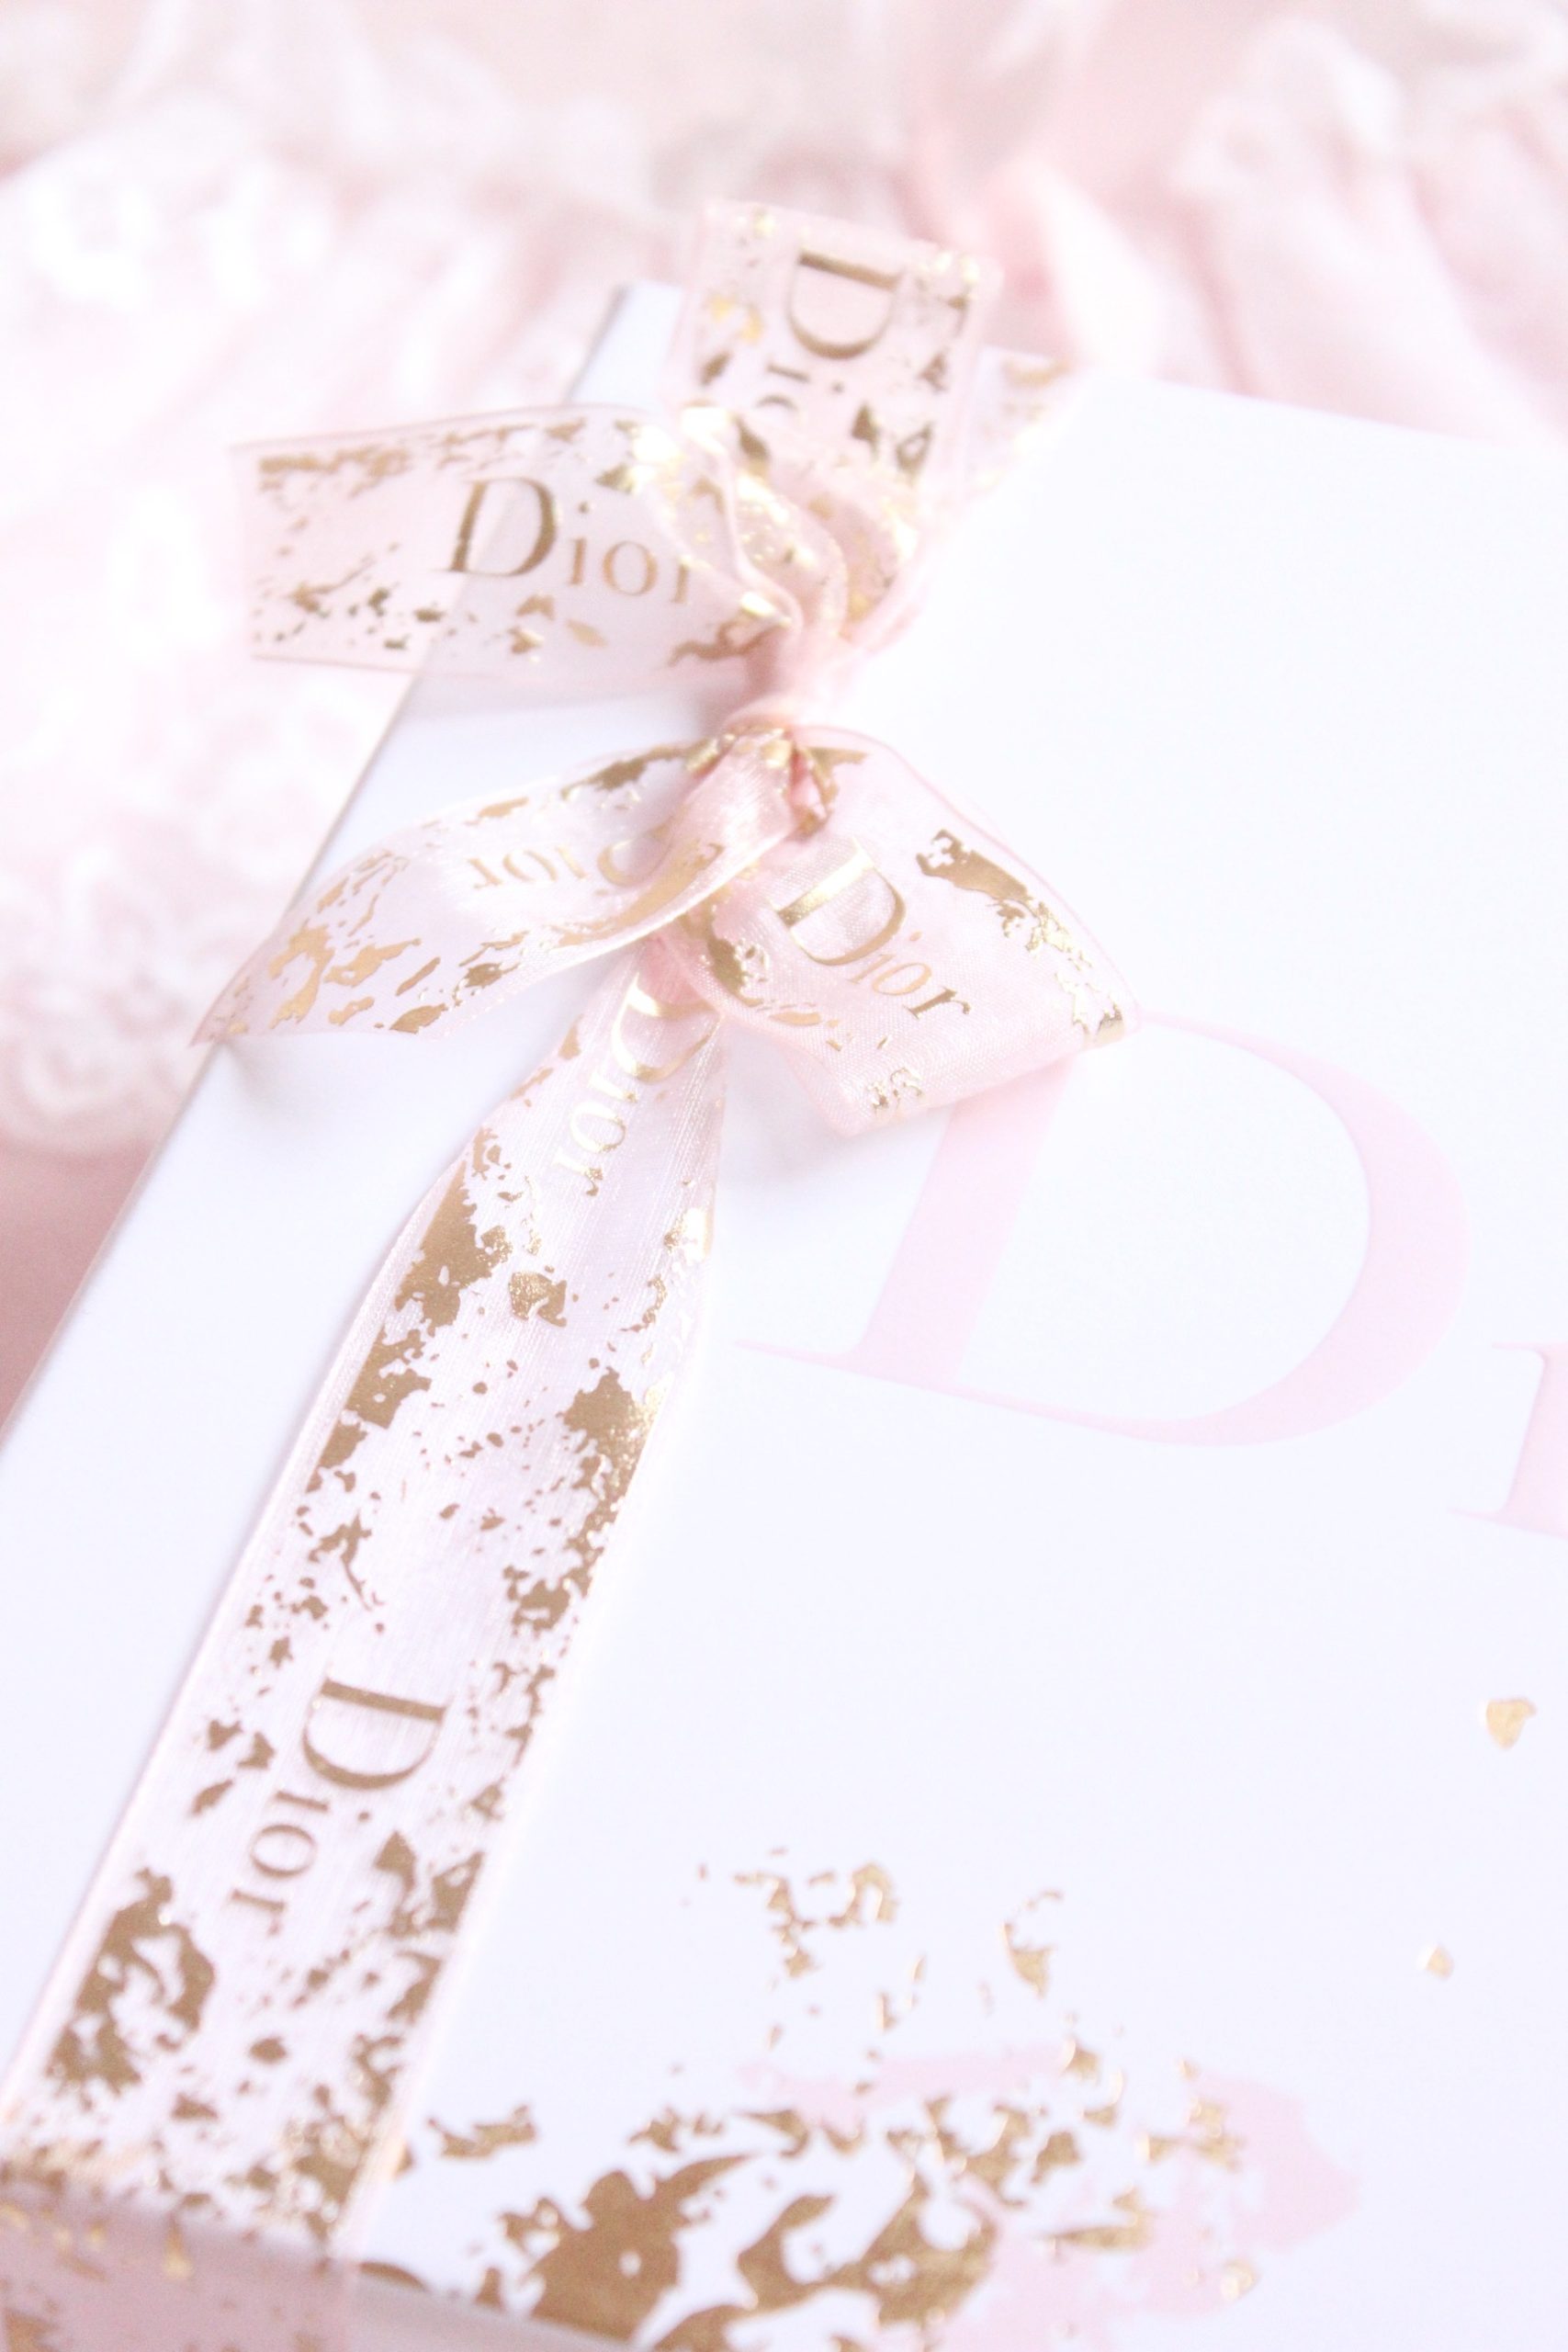 Love the ribbon rose on Dior gift wrap #giftwrapped #giftwrapping #dior